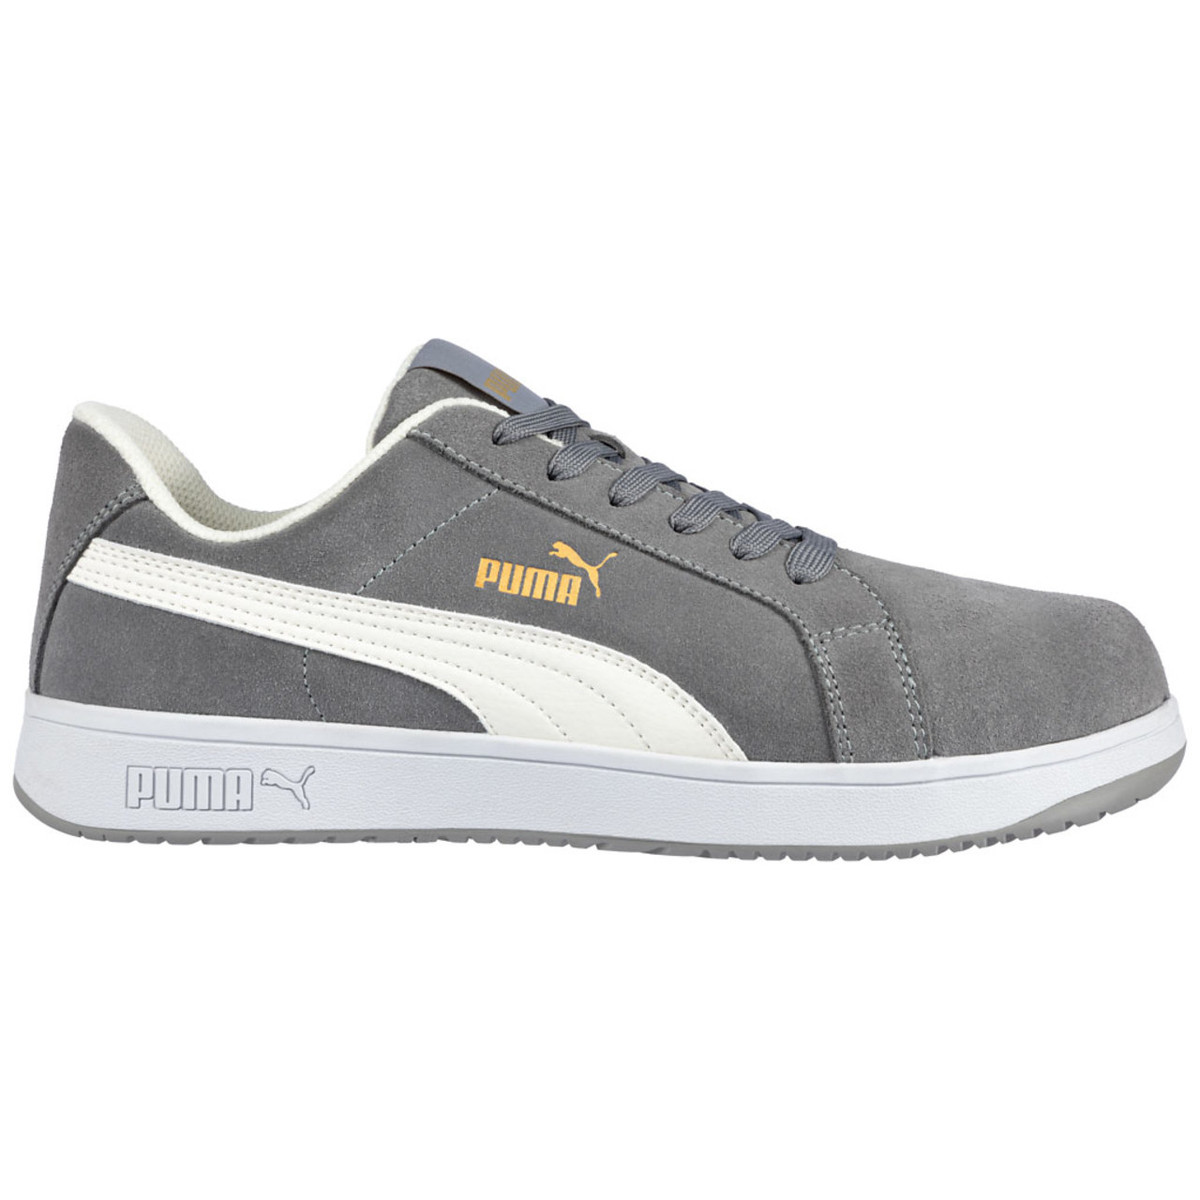 Misterioso éxtasis Perseguir Puma Safety Women's Icon Suede Low Grey & White SD Composite Toe Shoes -  640125